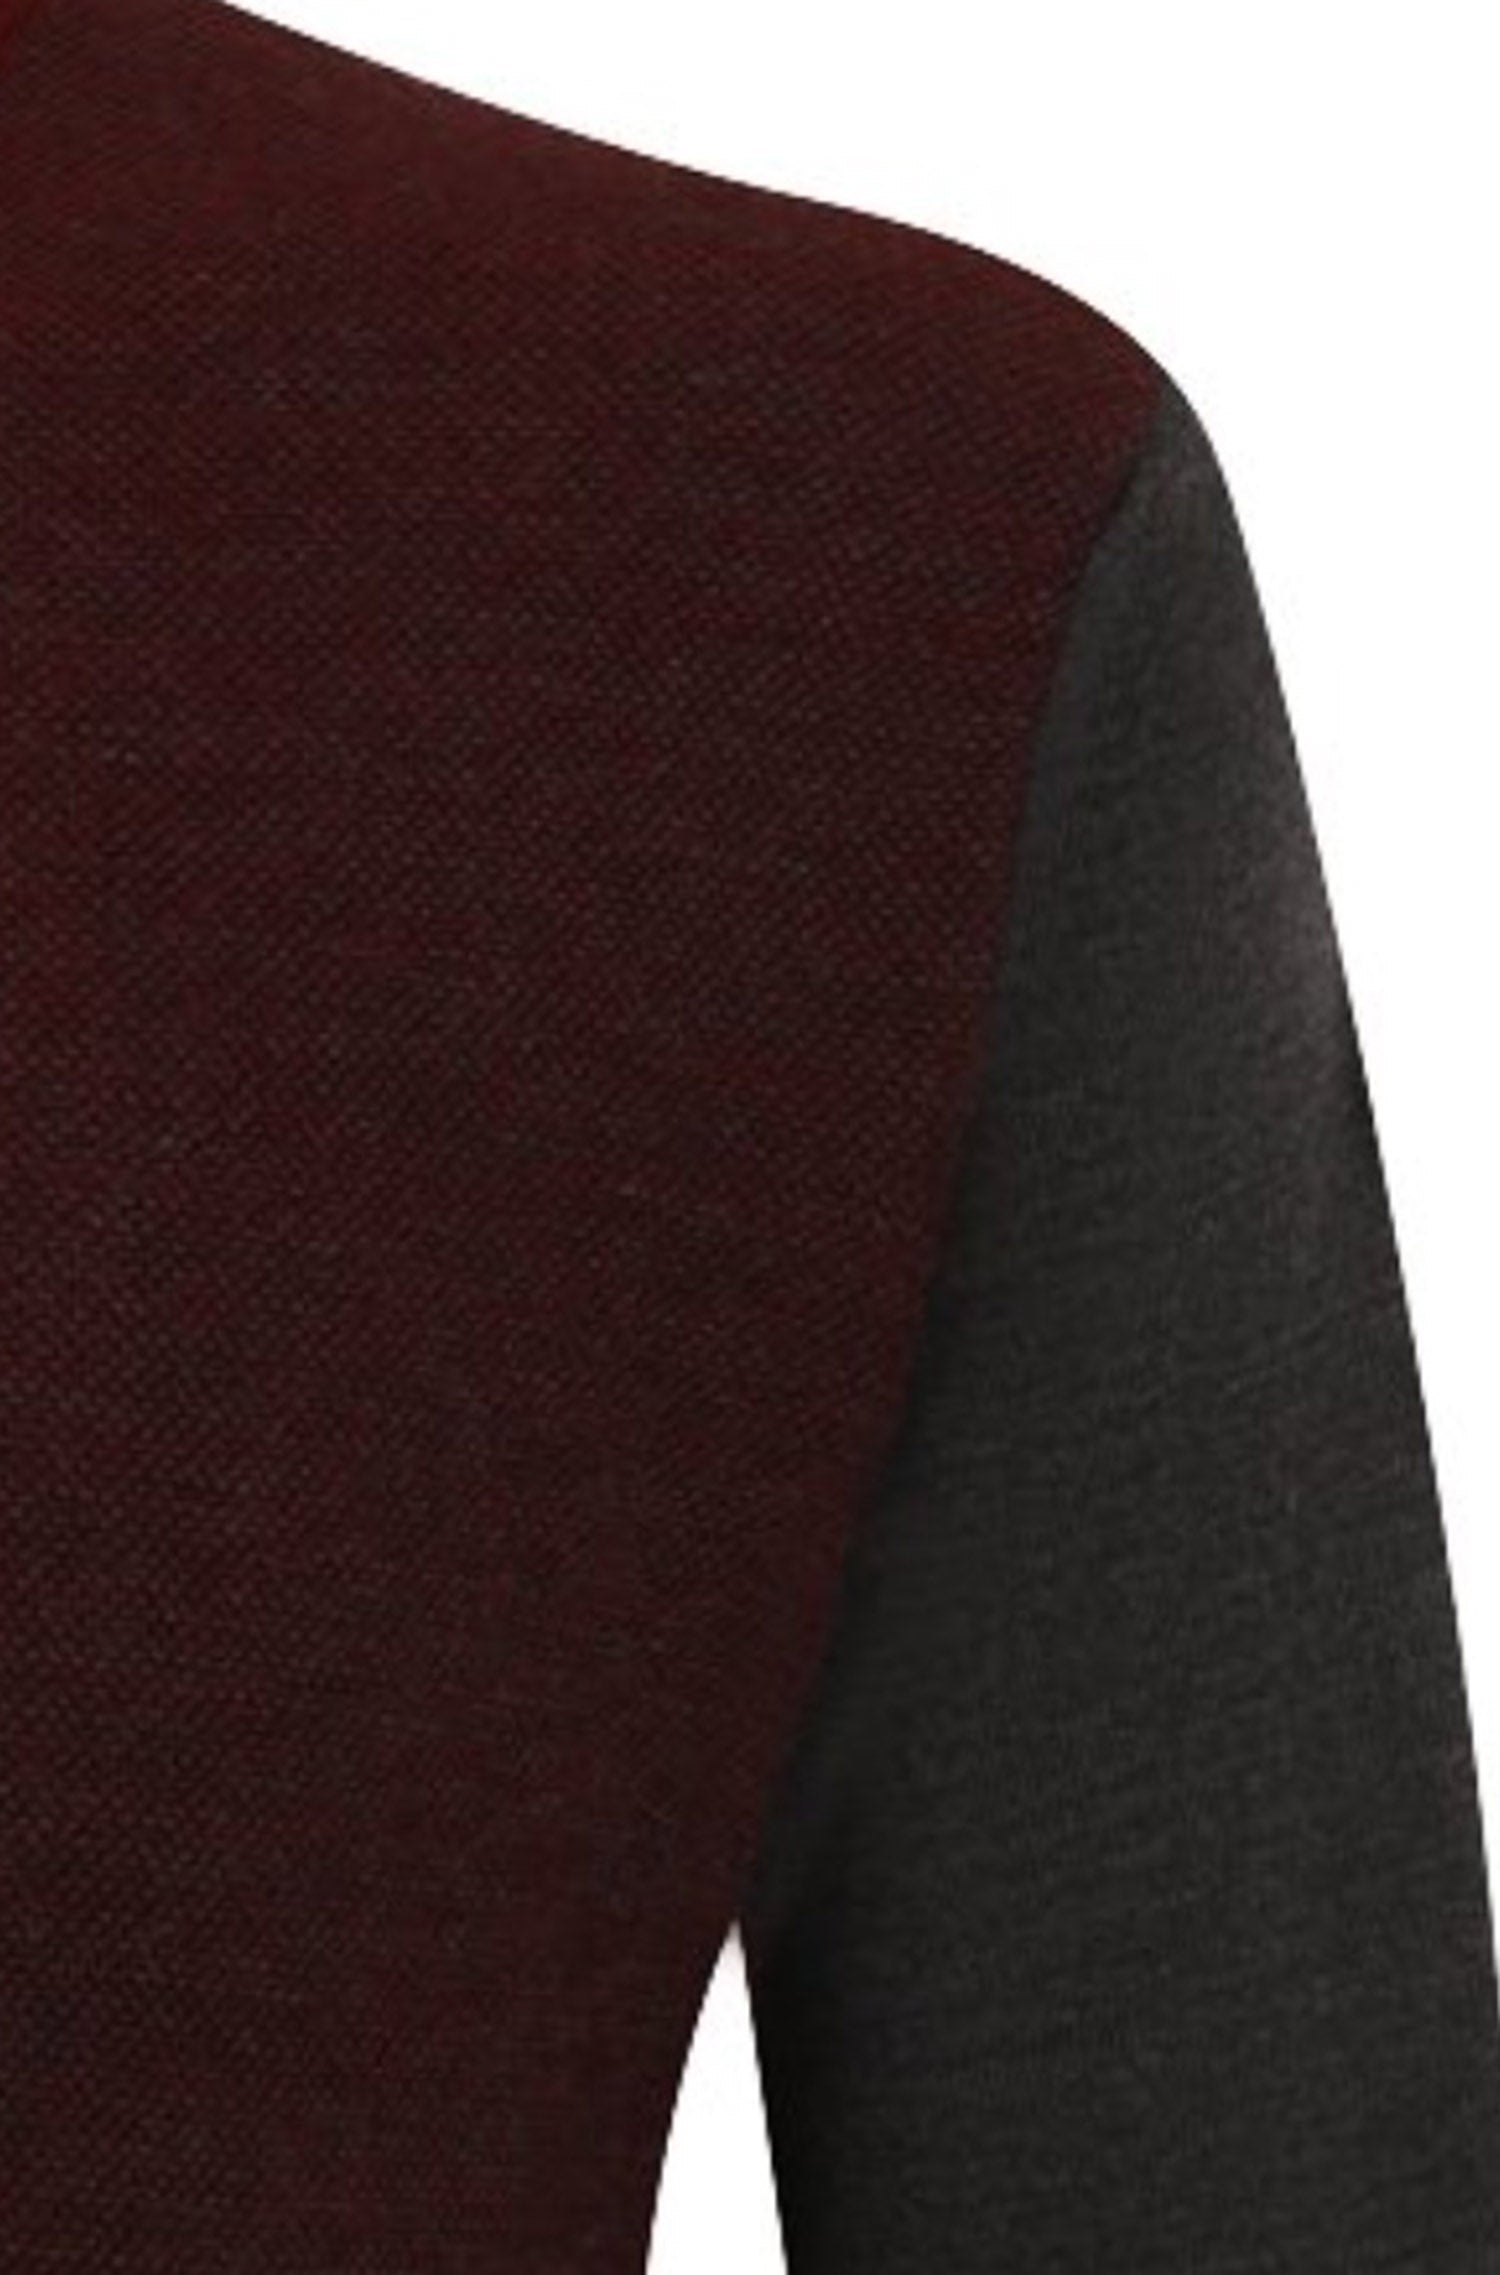 CANALI - Textured Dark Red Turtle Neck Knitwear With Contrast Charcoal Panels C0002.K01662.190